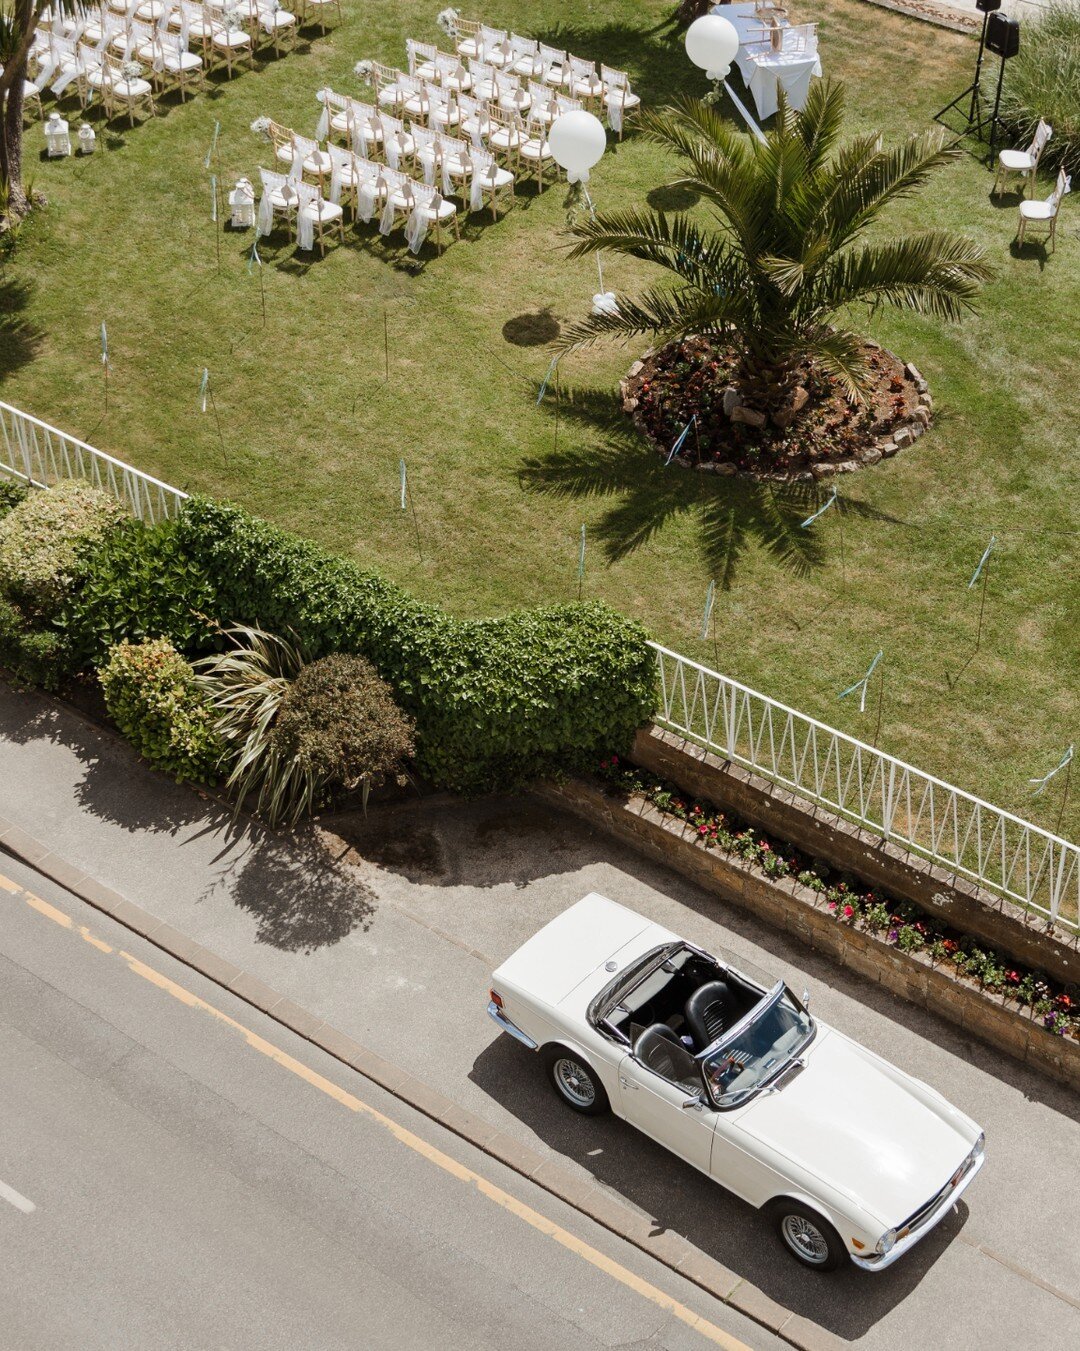 From above. 

A second photographer means that we can photograph your wedding day from different perspectives for a richer visual narrative.

Venue | @sbbhjersey
Celebrant | @tietheknotjersey
Florist | @bellafiori_jsy
Toastmaster | @jersey_toastmaste